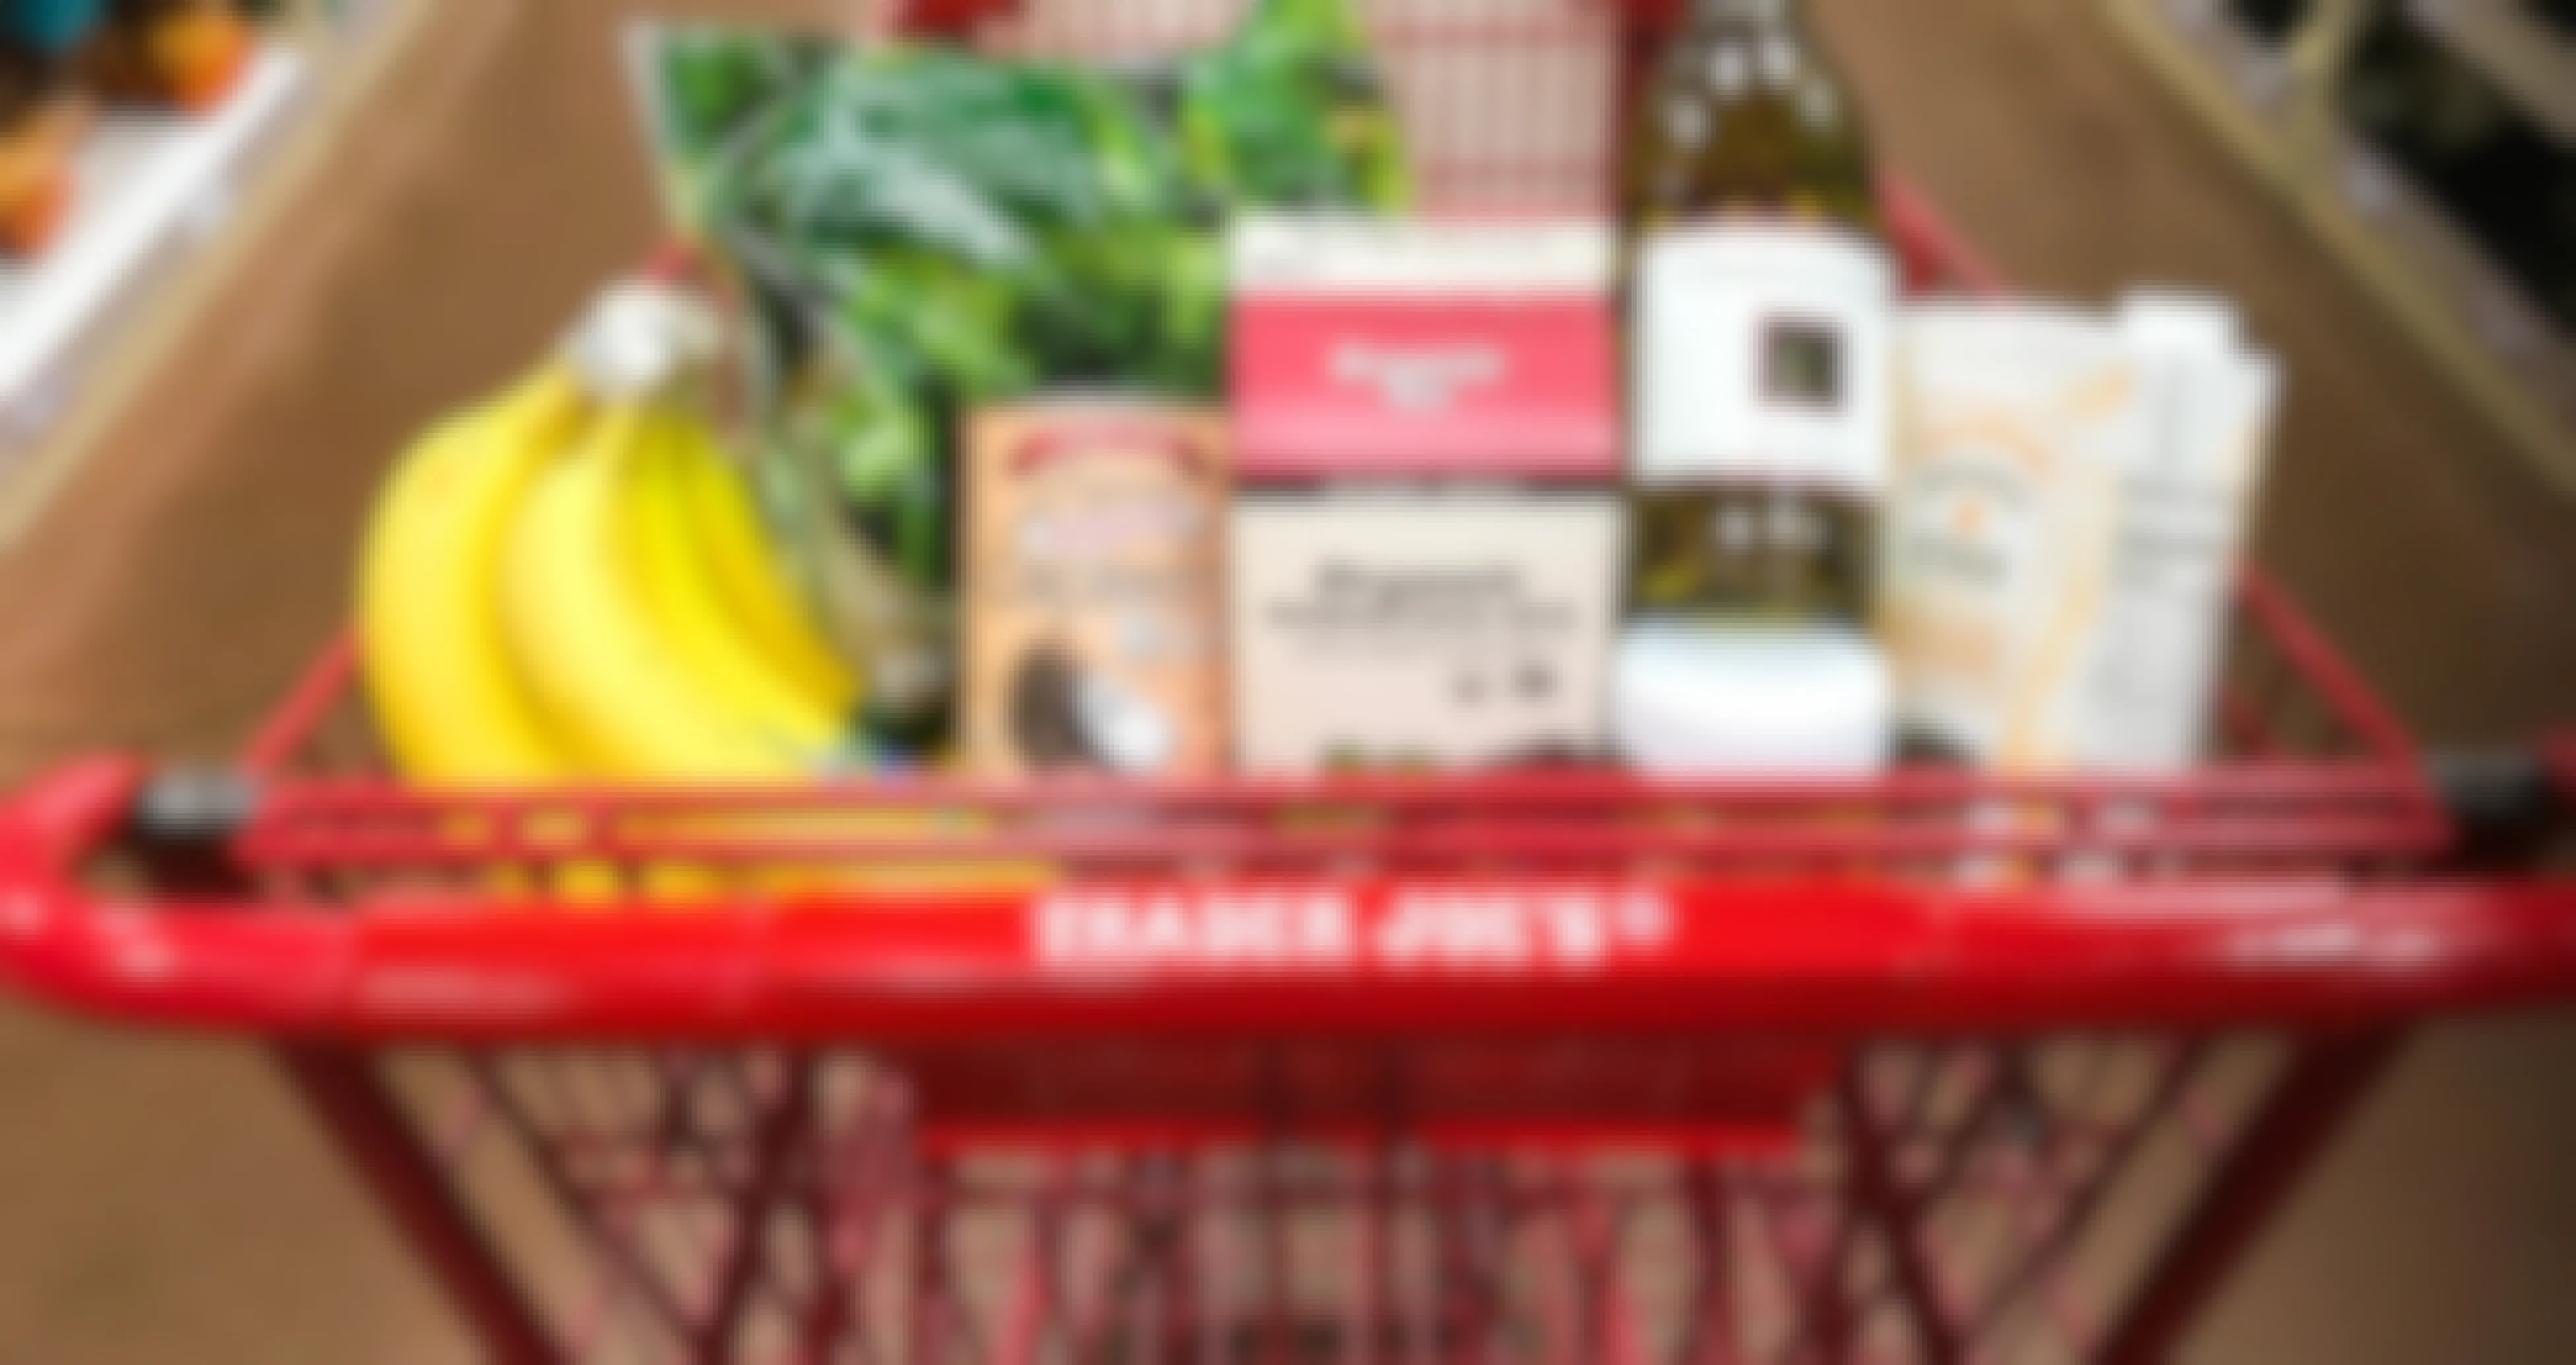 7 Best and 7 Worst Foods to Buy at Trader Joe's